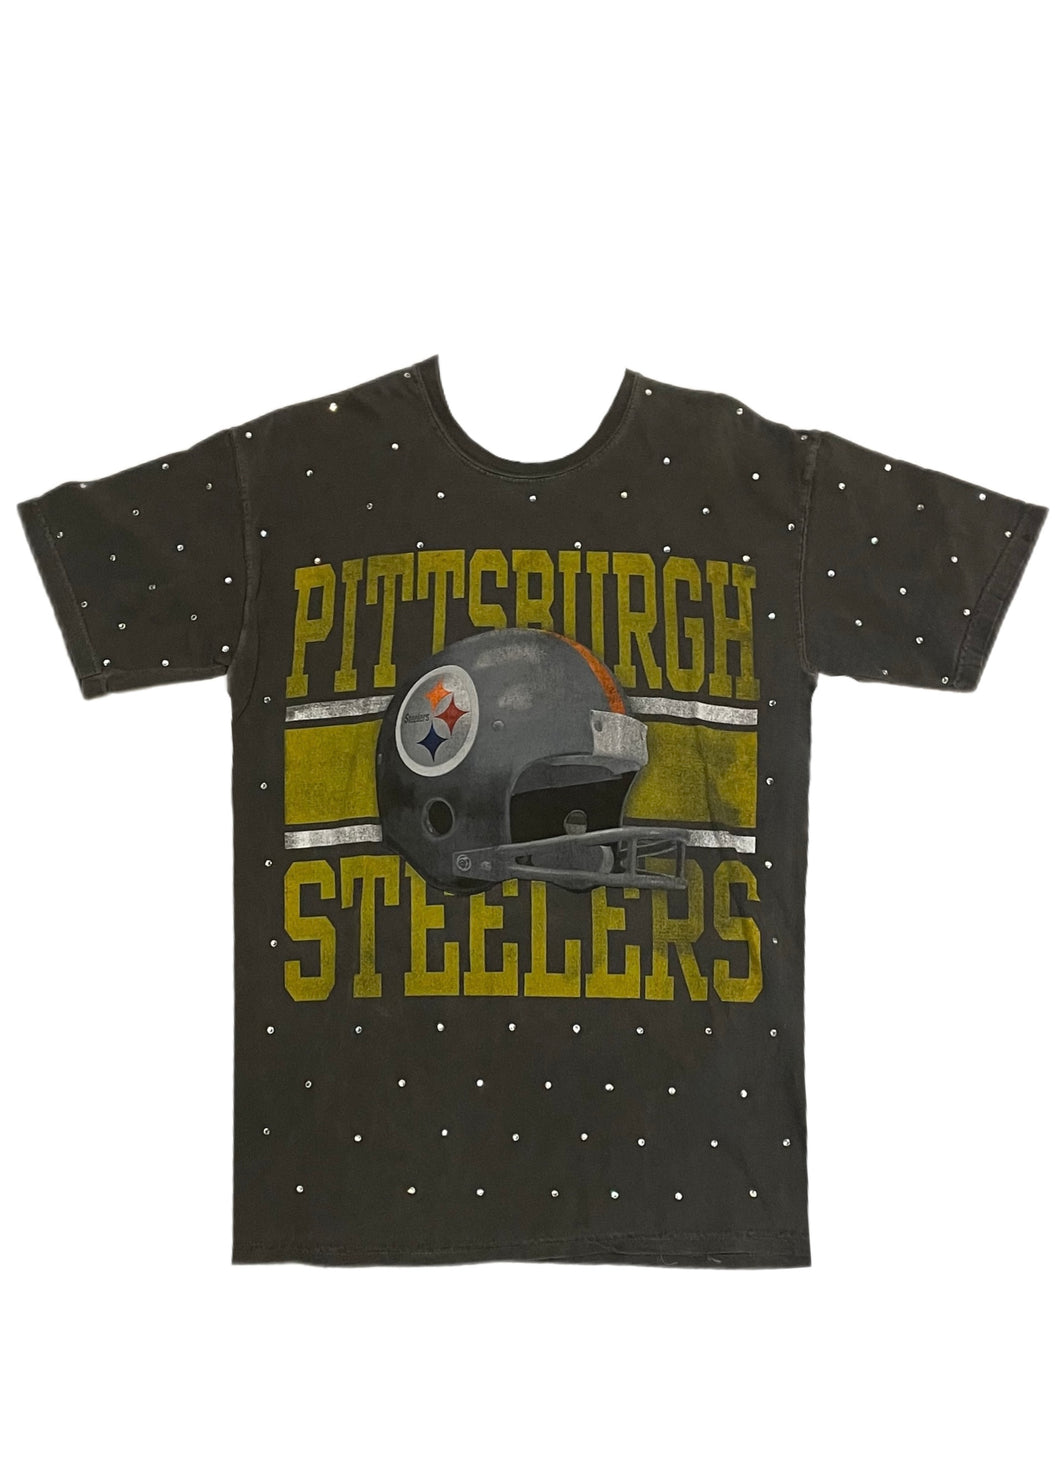 Pittsburgh Steelers, NFL One of a KIND Vintage Tee with Overall Crystal Design.